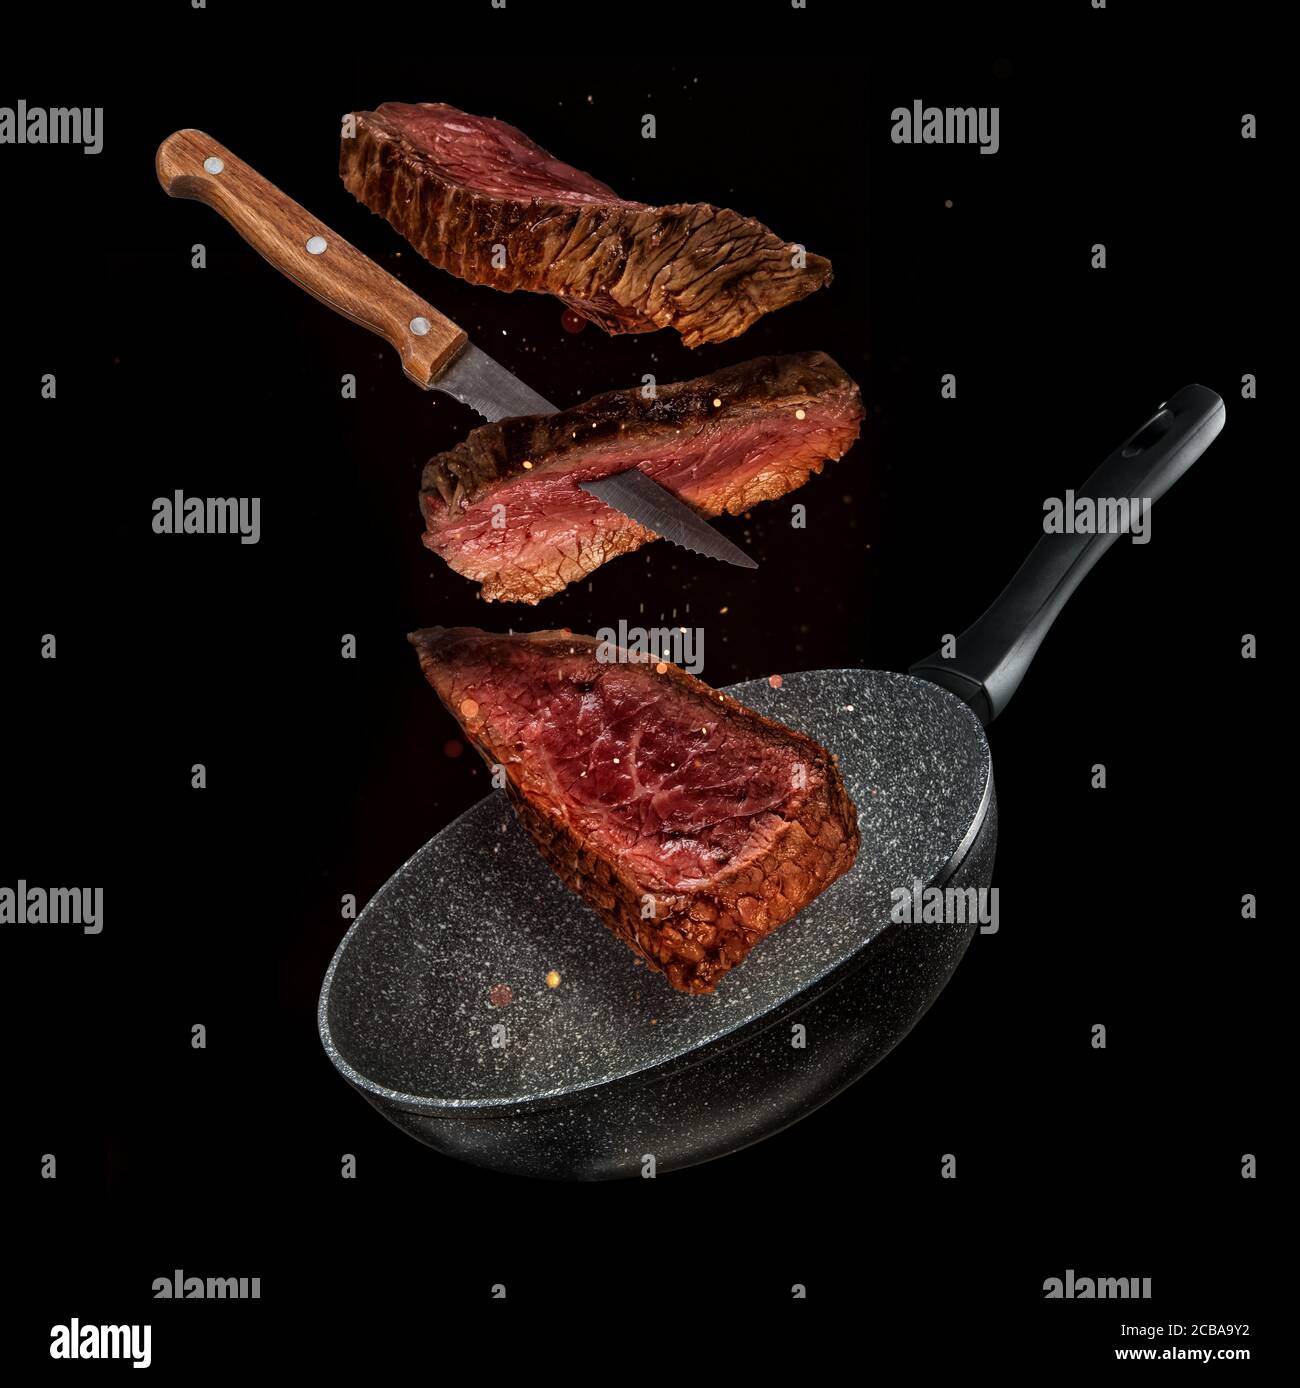 https://c8.alamy.com/comp/2CBA9Y2/flying-pieces-of-beef-steaks-from-pan-isolated-on-black-background-concept-of-flying-food-very-high-resolution-image-2CBA9Y2.jpg